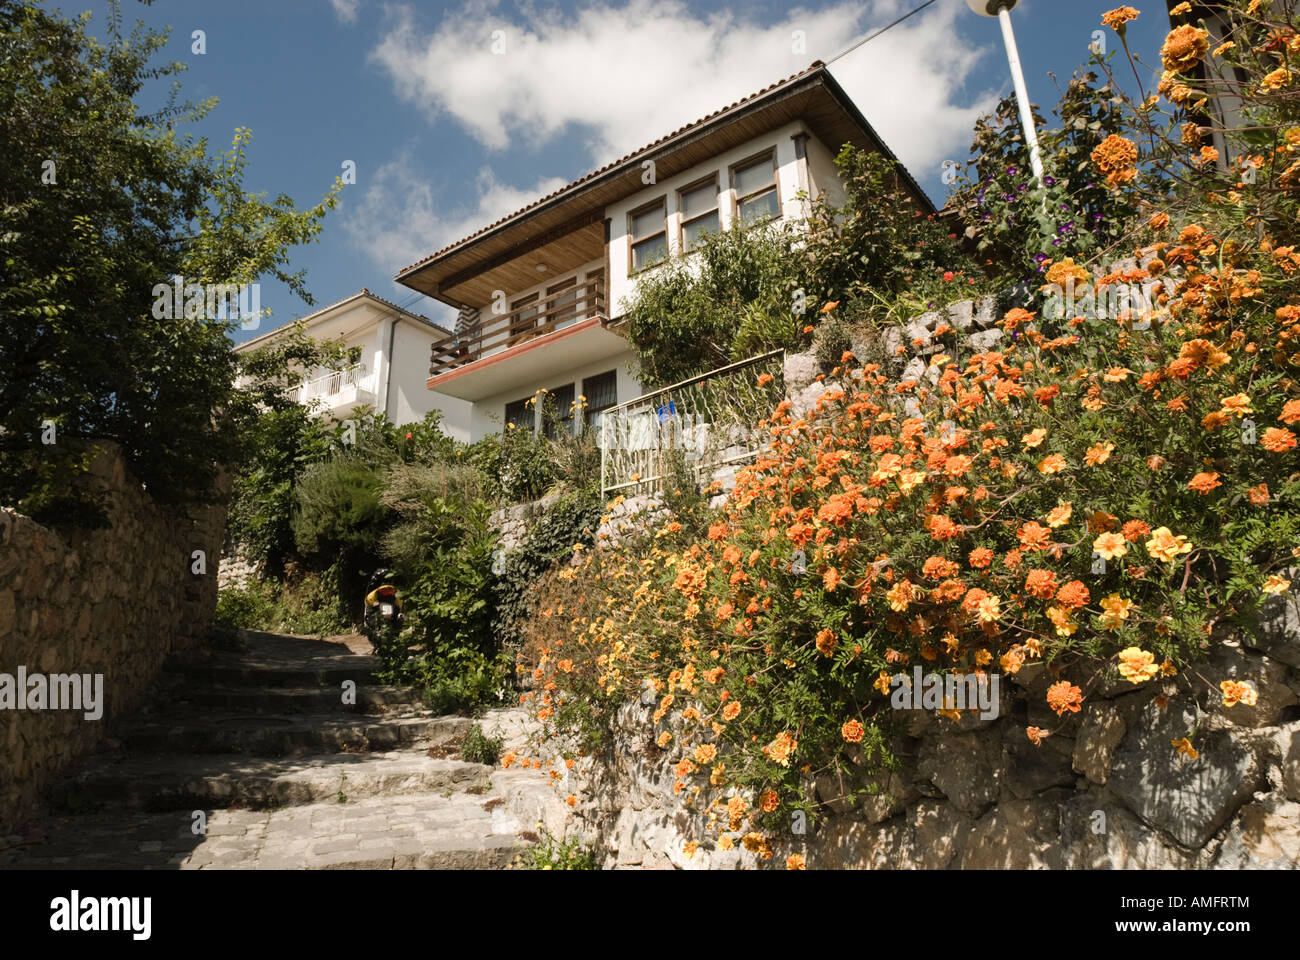 Residential houses and ornamental flowers in Orhid old town, Macedonia Stock Photo